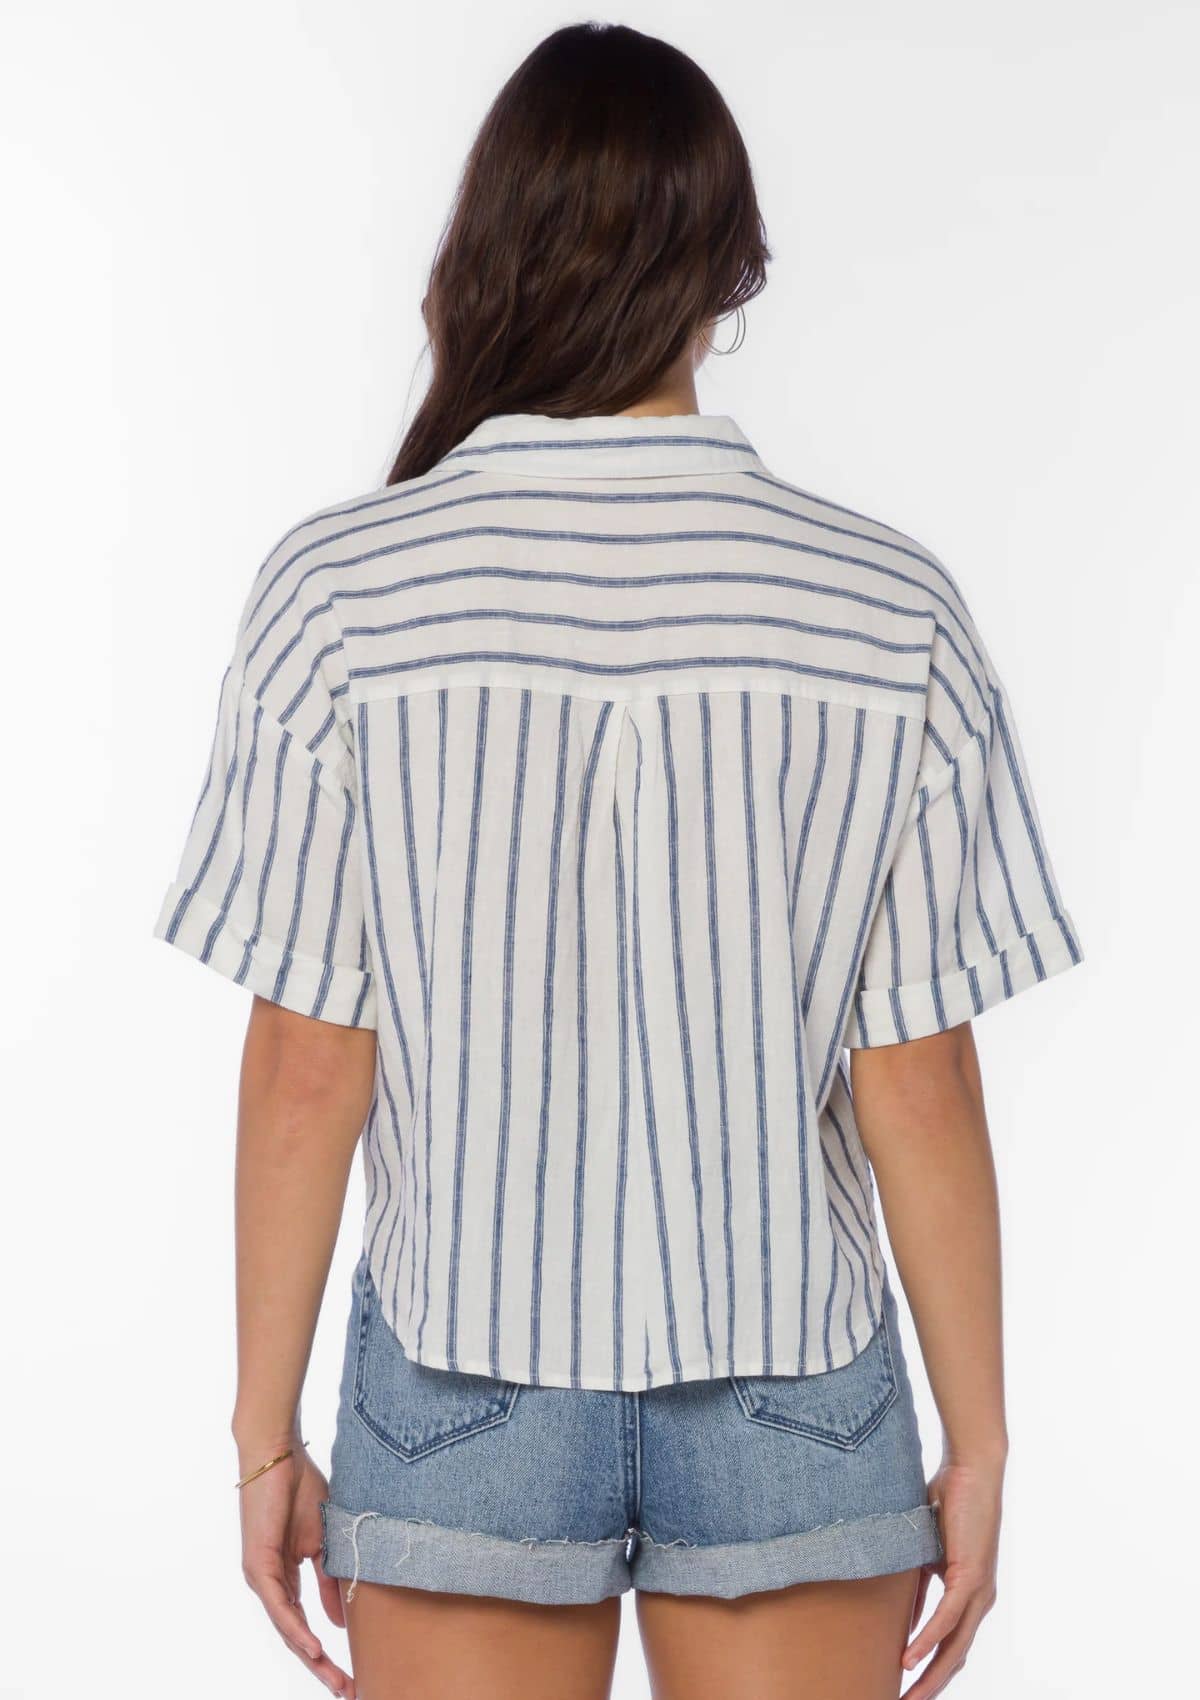 White with thin blue stripes. Paired with jean shorts.